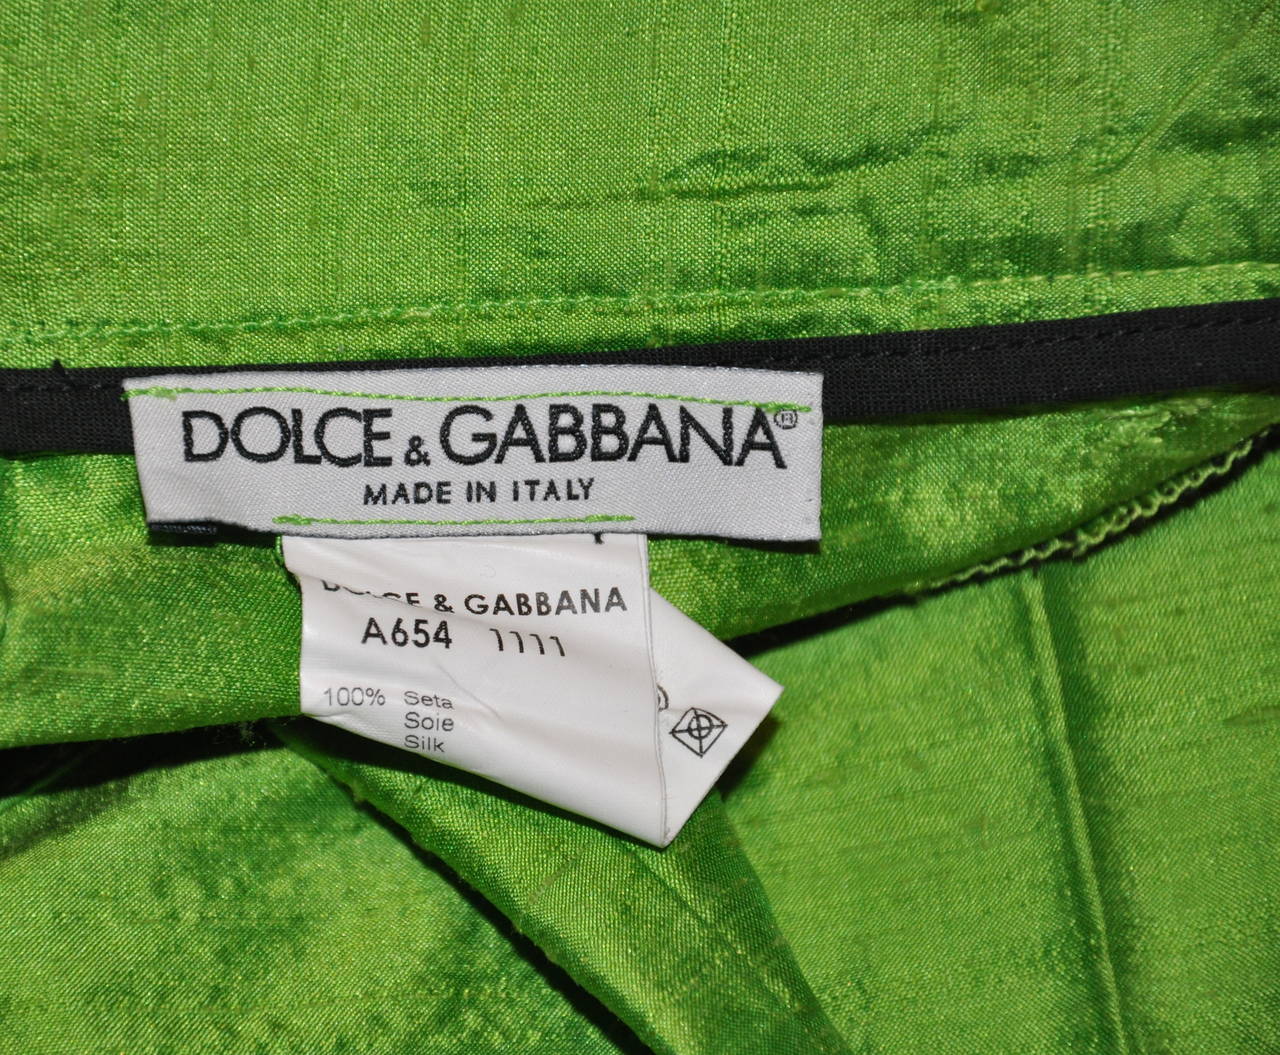 Dolce & Gabbana's wonderful two-pice ensemble consists of a solid silk five-pocket trousers in bold lime-green. The waist measures 28